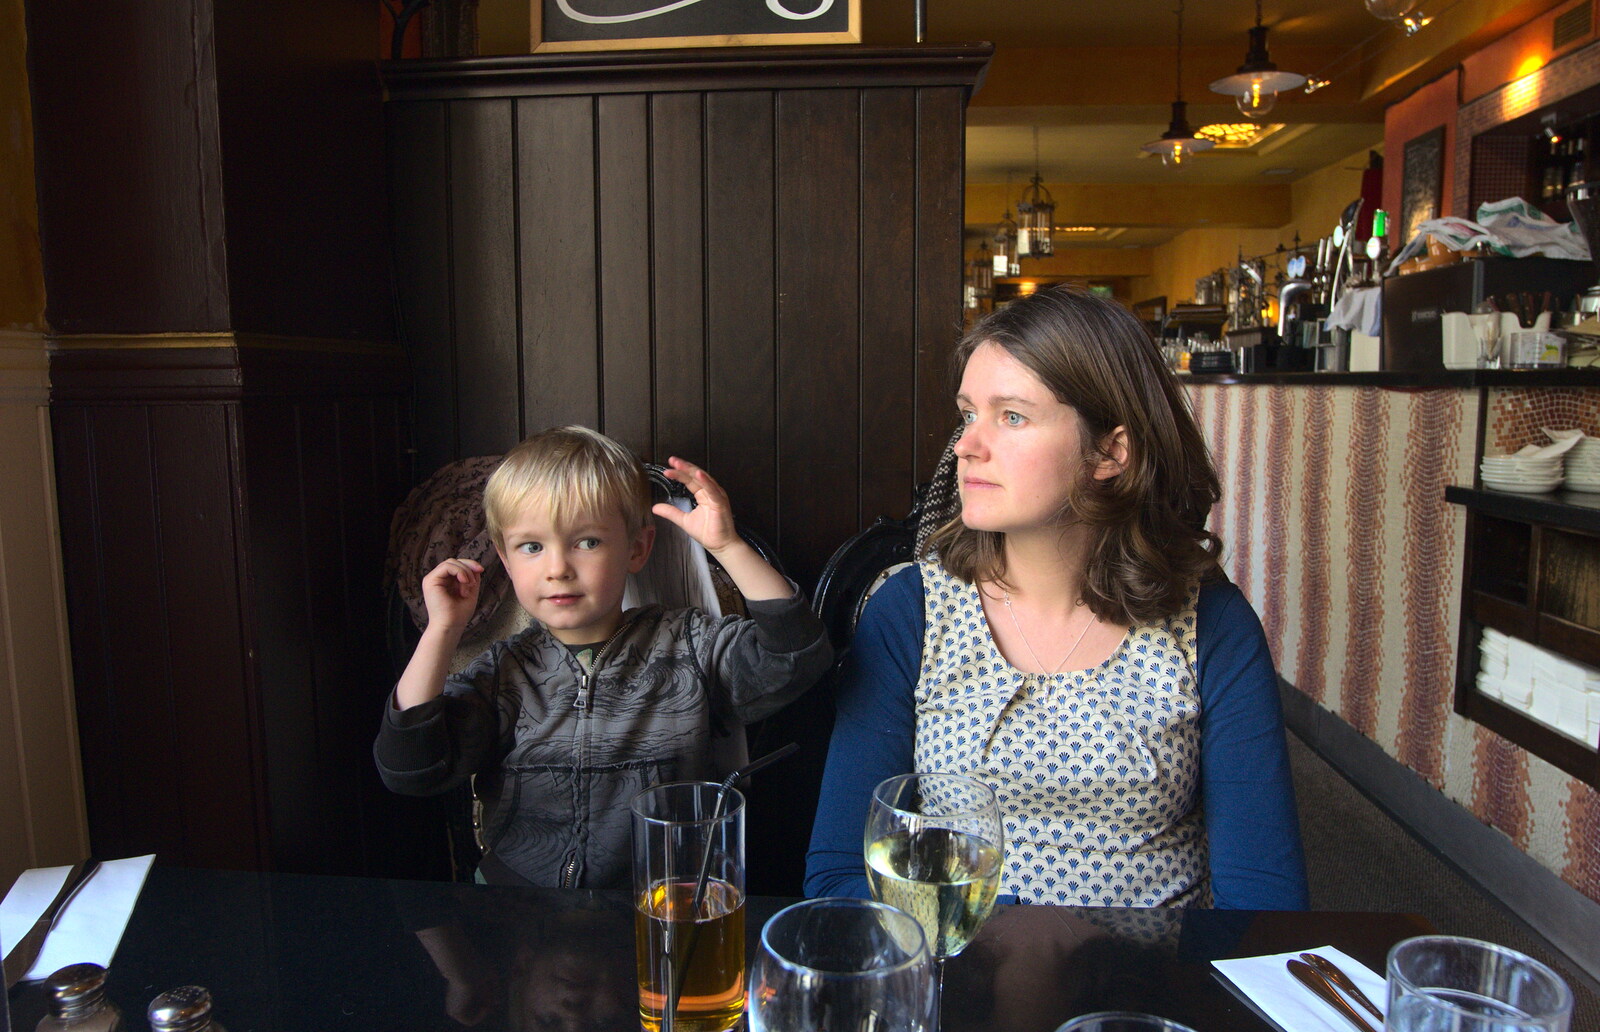 Harry and Isobel from Temple Bar and Dun Laoghaire, Dublin, Ireland - 16th April 2015